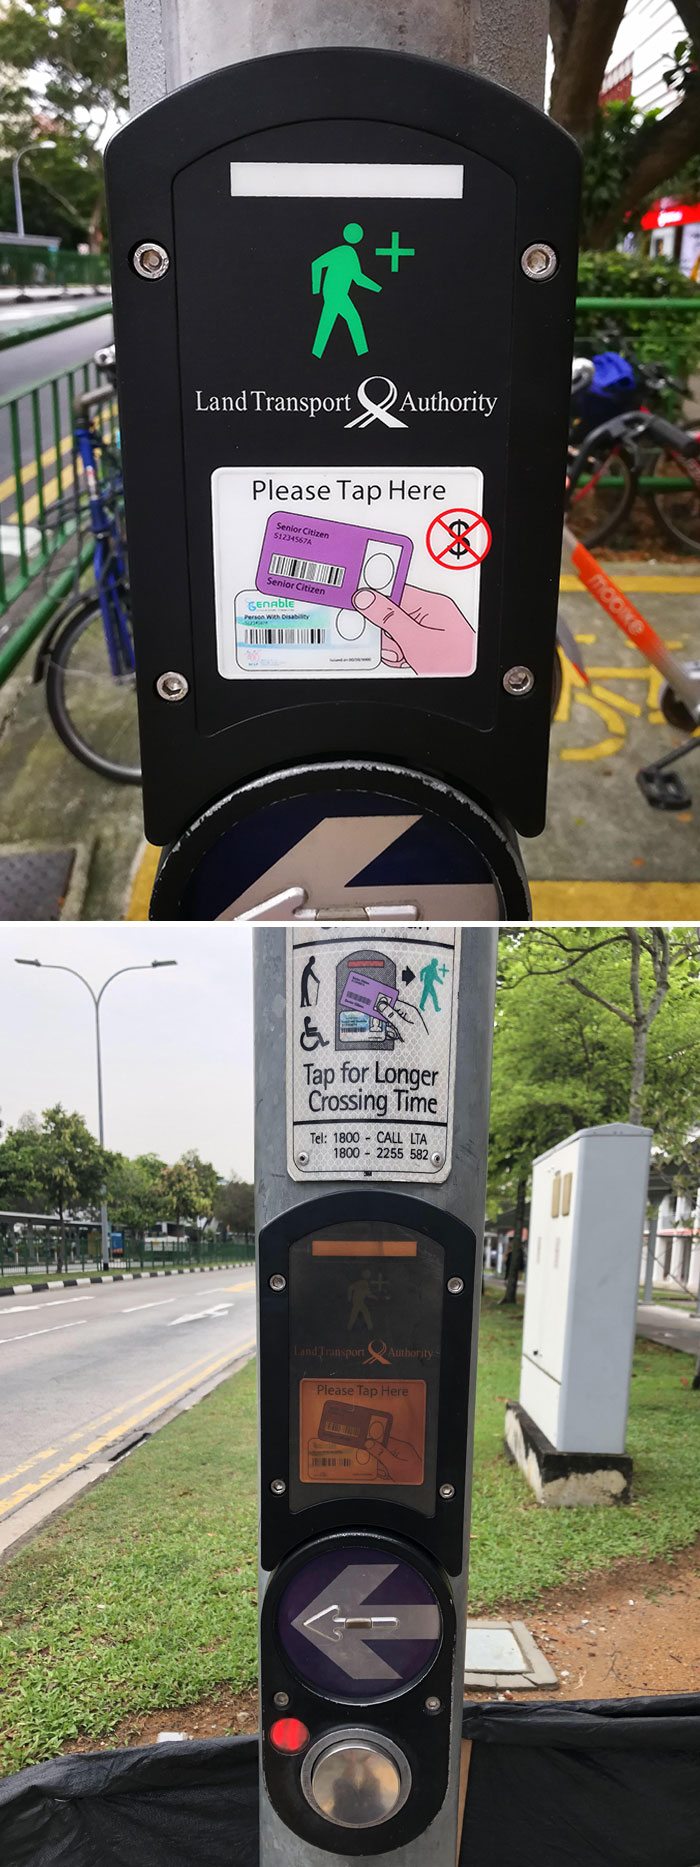 In Singapore, Elderly Pedestrians Can Tap Their Identity Cards To Have More Time At The Pedestrian Crossing